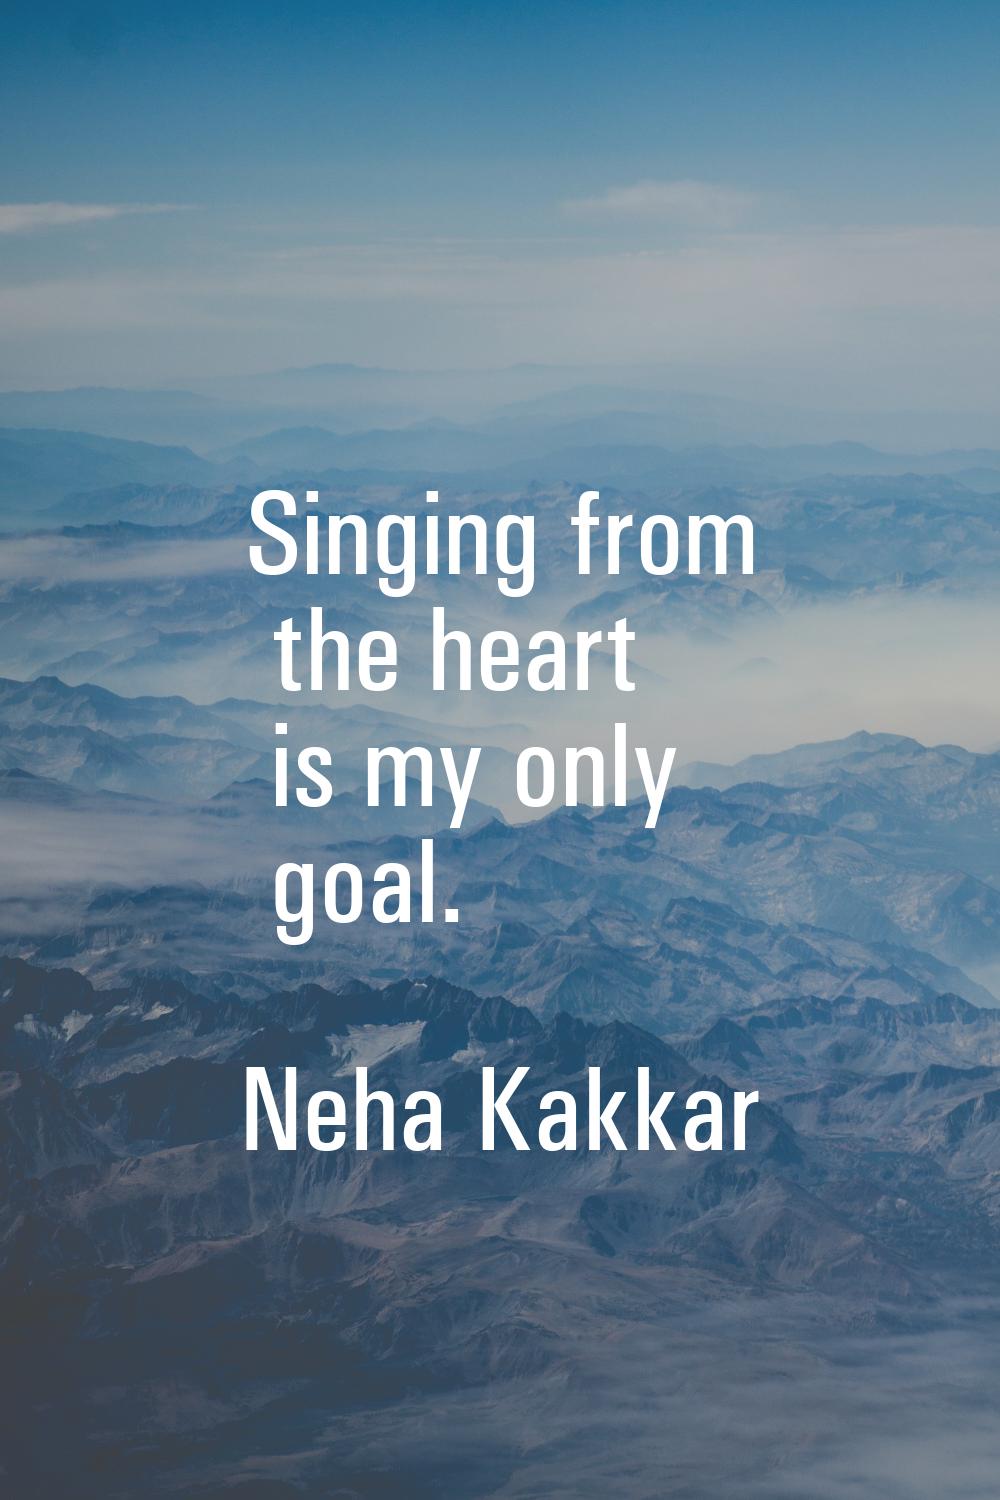 Singing from the heart is my only goal.